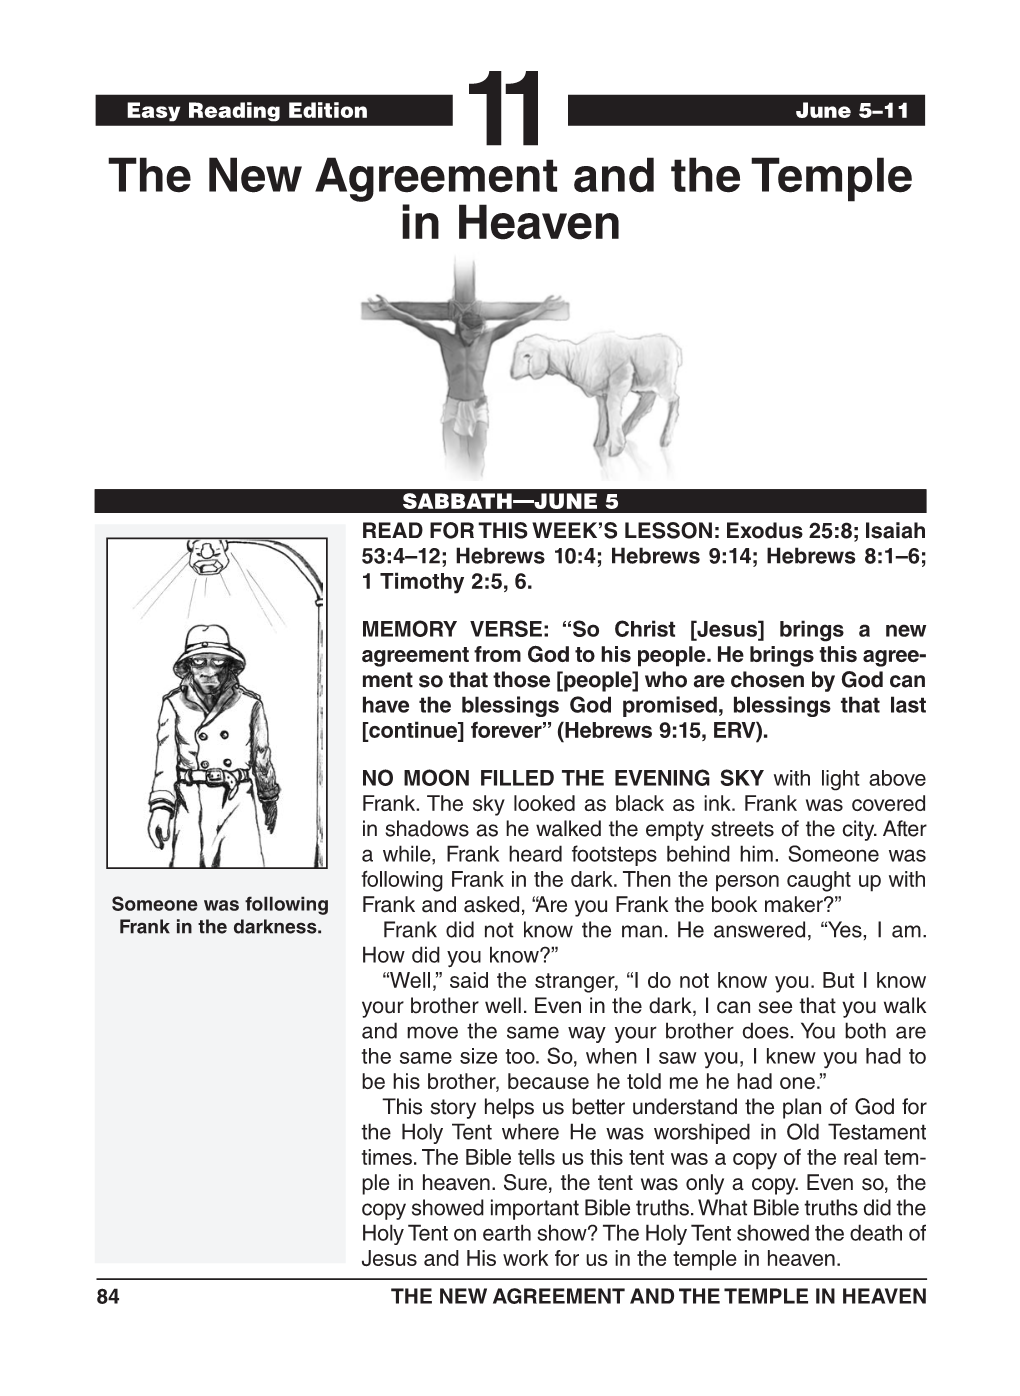 The New Agreement and the Temple in Heaven